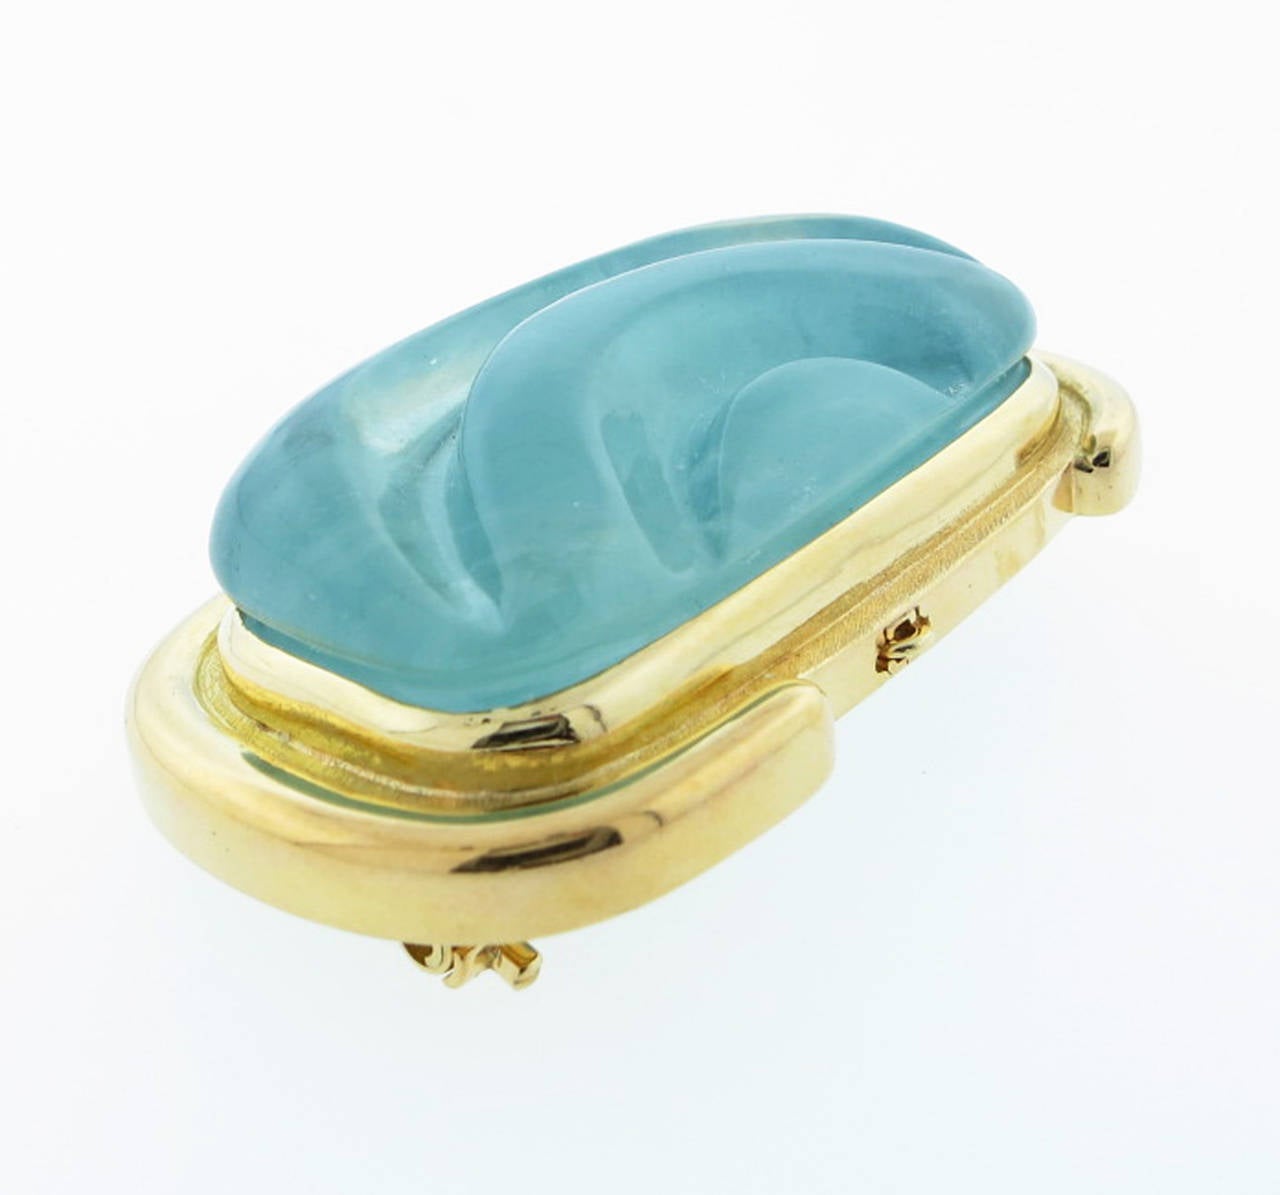 Free form carved natural aquamarine brooch -pendant in a style that made Burle Marx the modernist Brazilian jeweler famous.. The handmade 18kt. yellow gold mount has a double clip back with a retractable pendant bail. 
The aqua measures approx 1